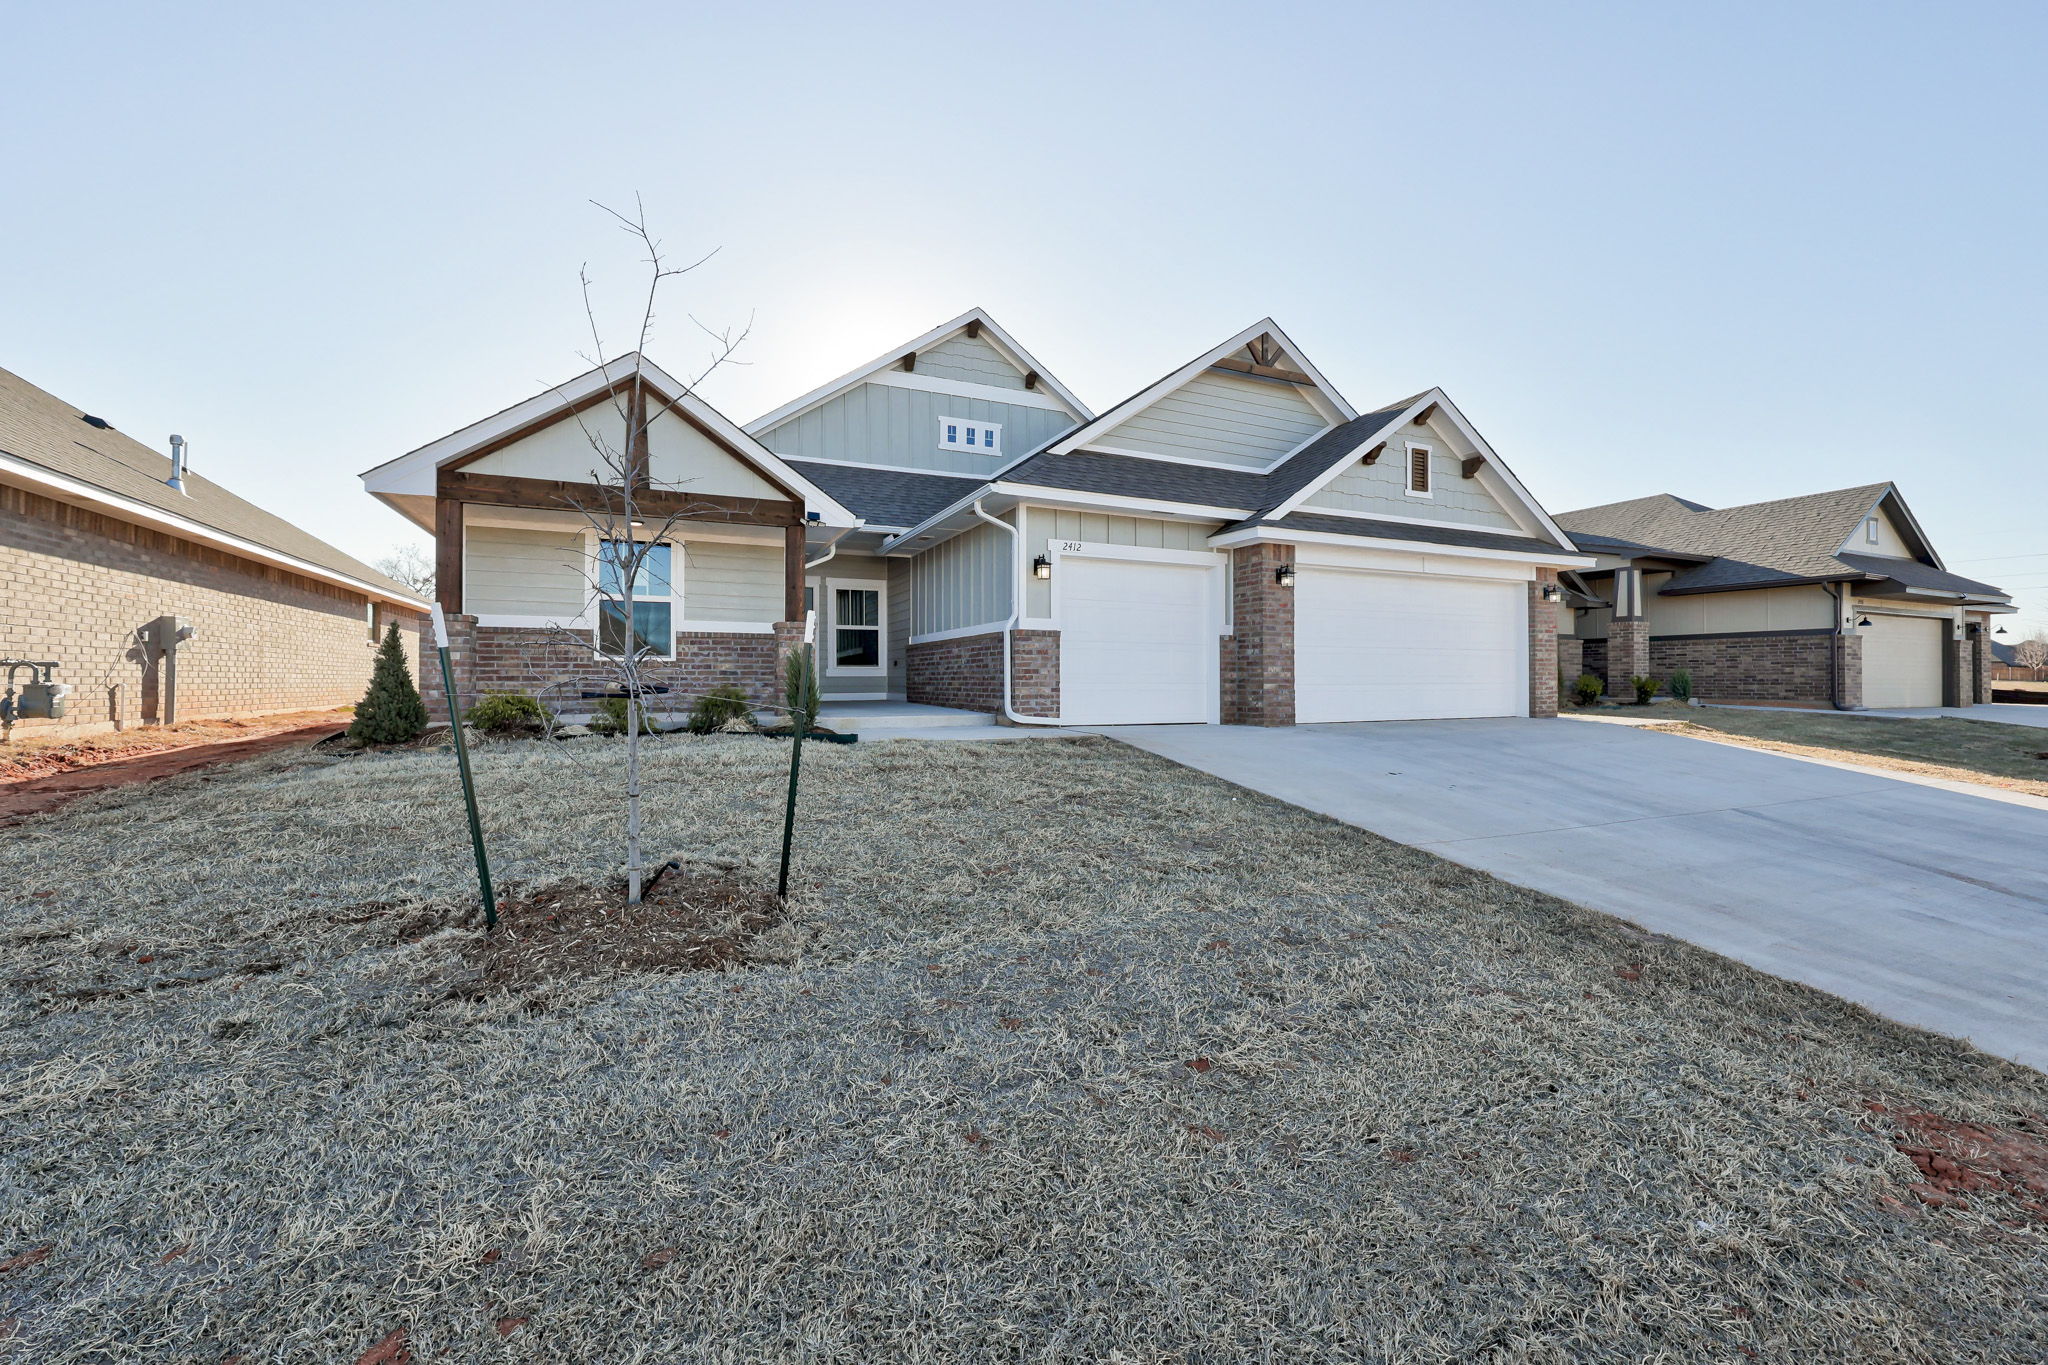 2412 Creekview Trail, Moore, Oklahoma 73160, 4 Bedrooms Bedrooms, ,2 BathroomsBathrooms,House,For Sale,Creekview Trail,1456